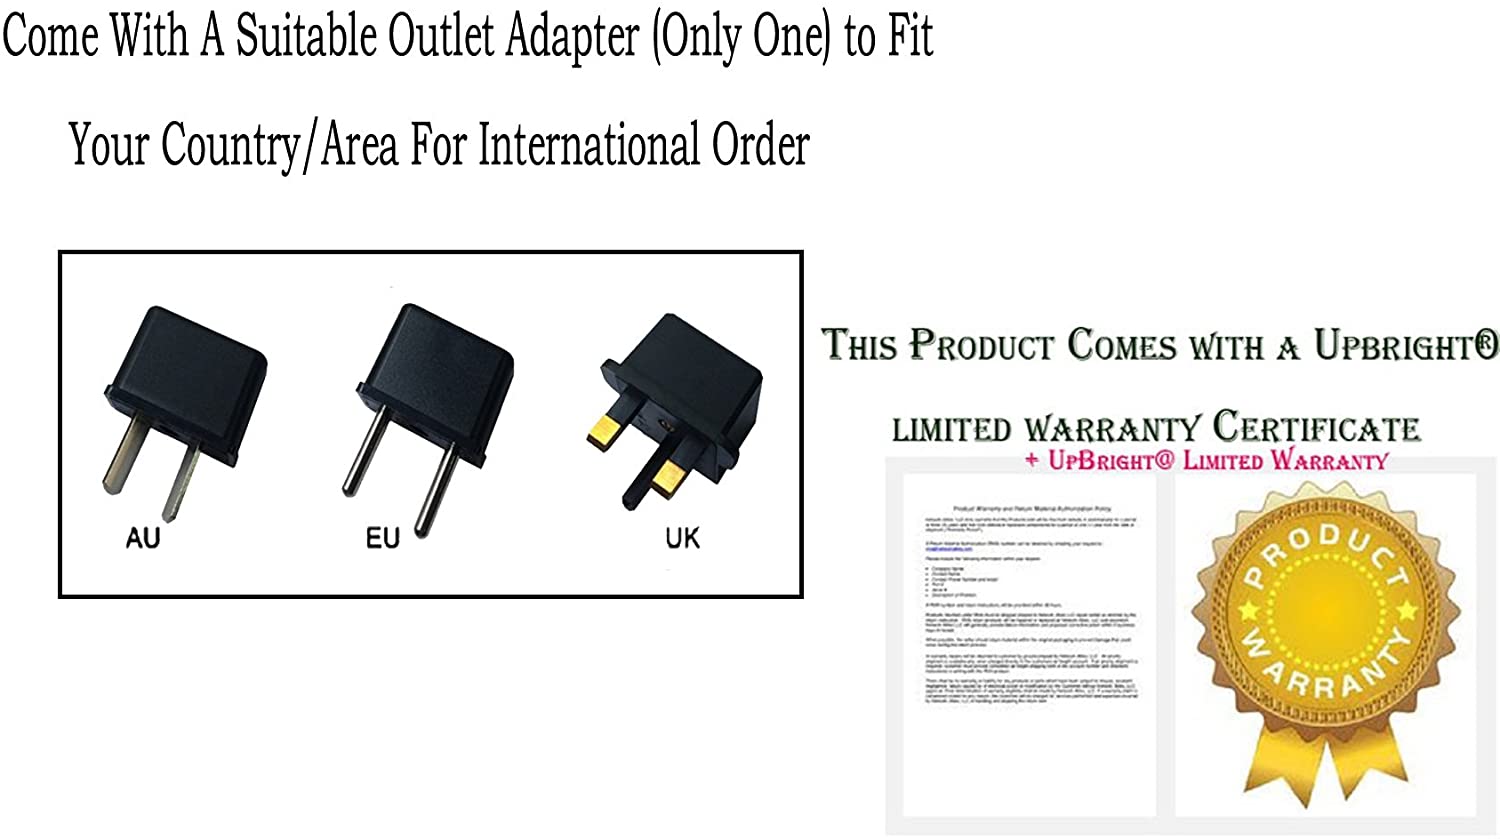 UPBRIGHT NEW Global AC / DC Adapter For Fujitsu fi-7030 PA03750-B005 PA03750-B001 fi7030 Sheetfed Scanner Power Supply Cord Cable PS Charger Mains PSU - image 4 of 5